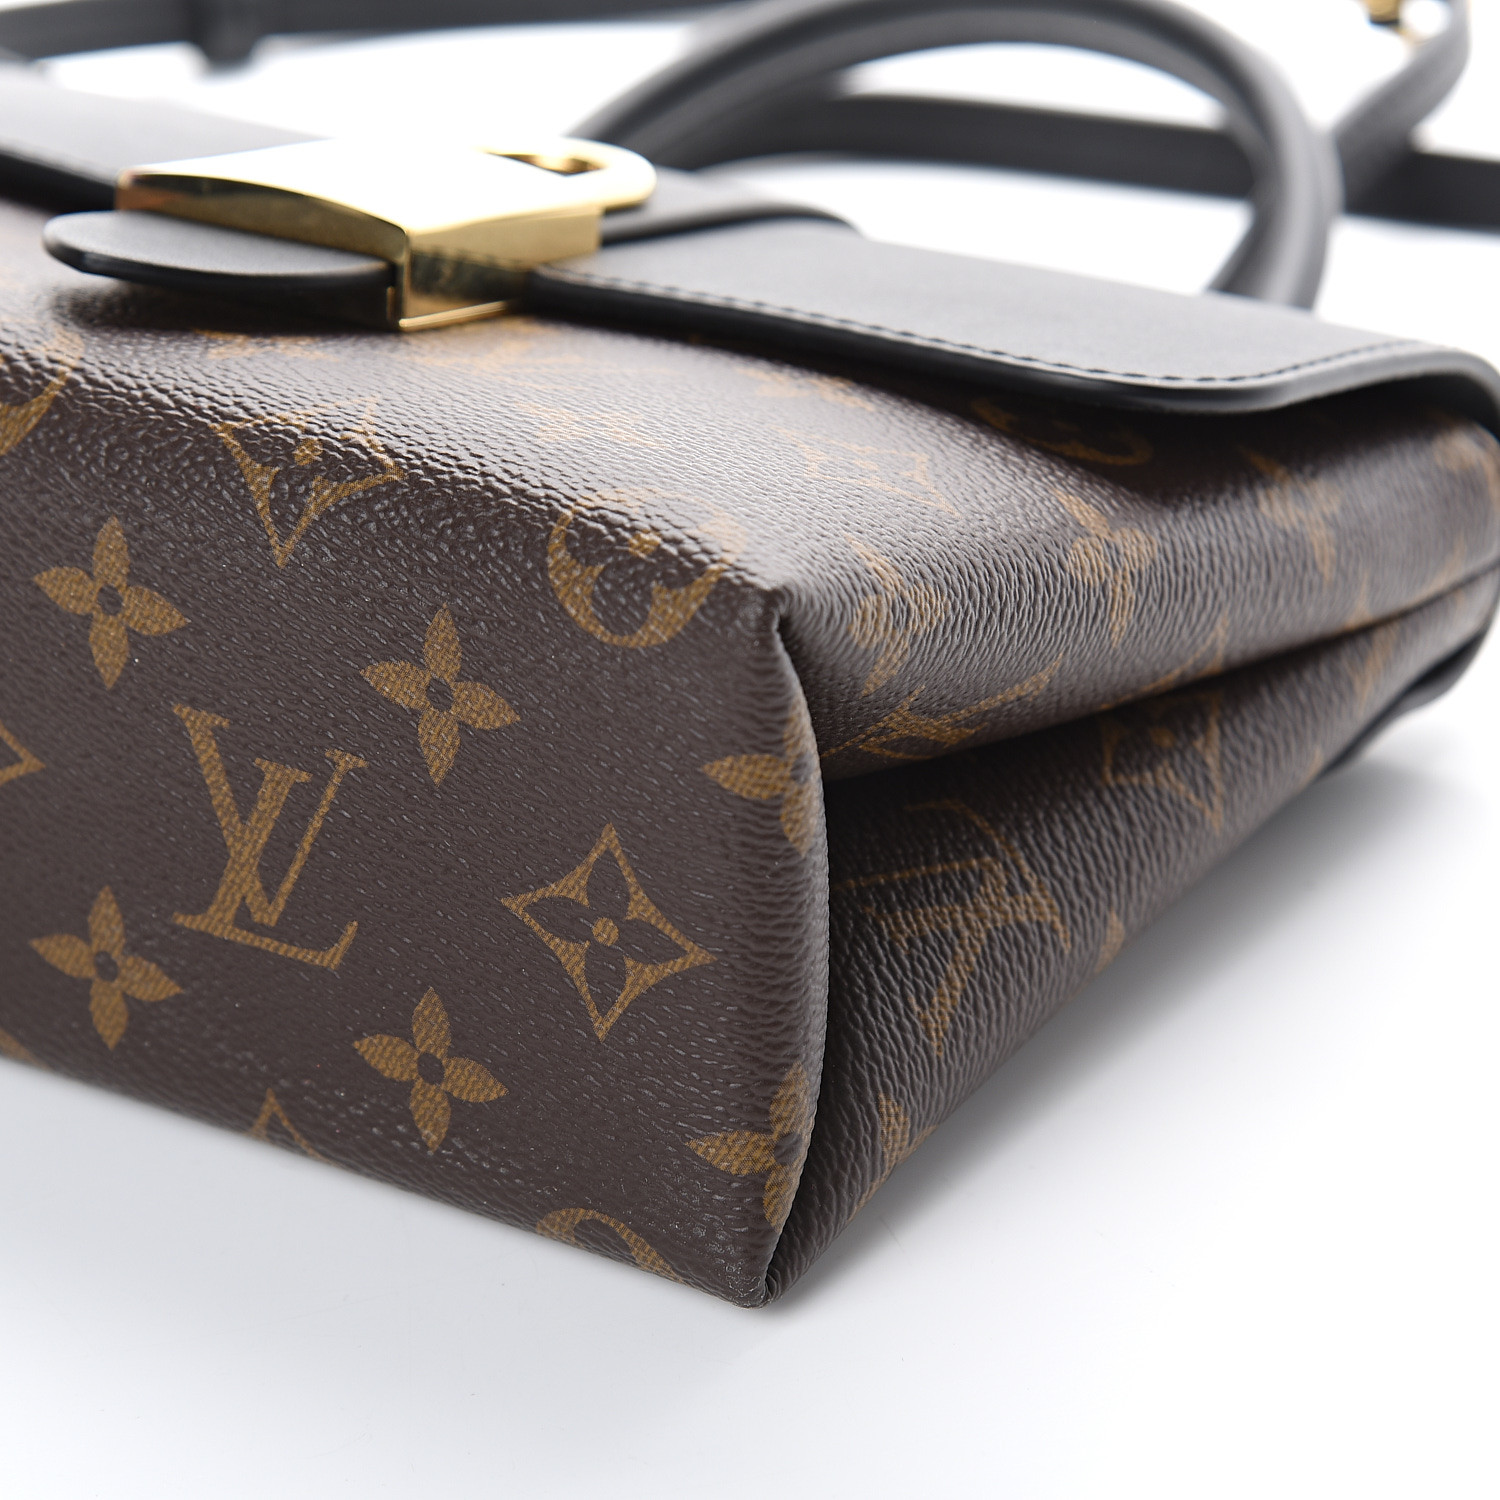 Louis Vuitton Big Monogram Tote - 2 For Sale on 1stDibs